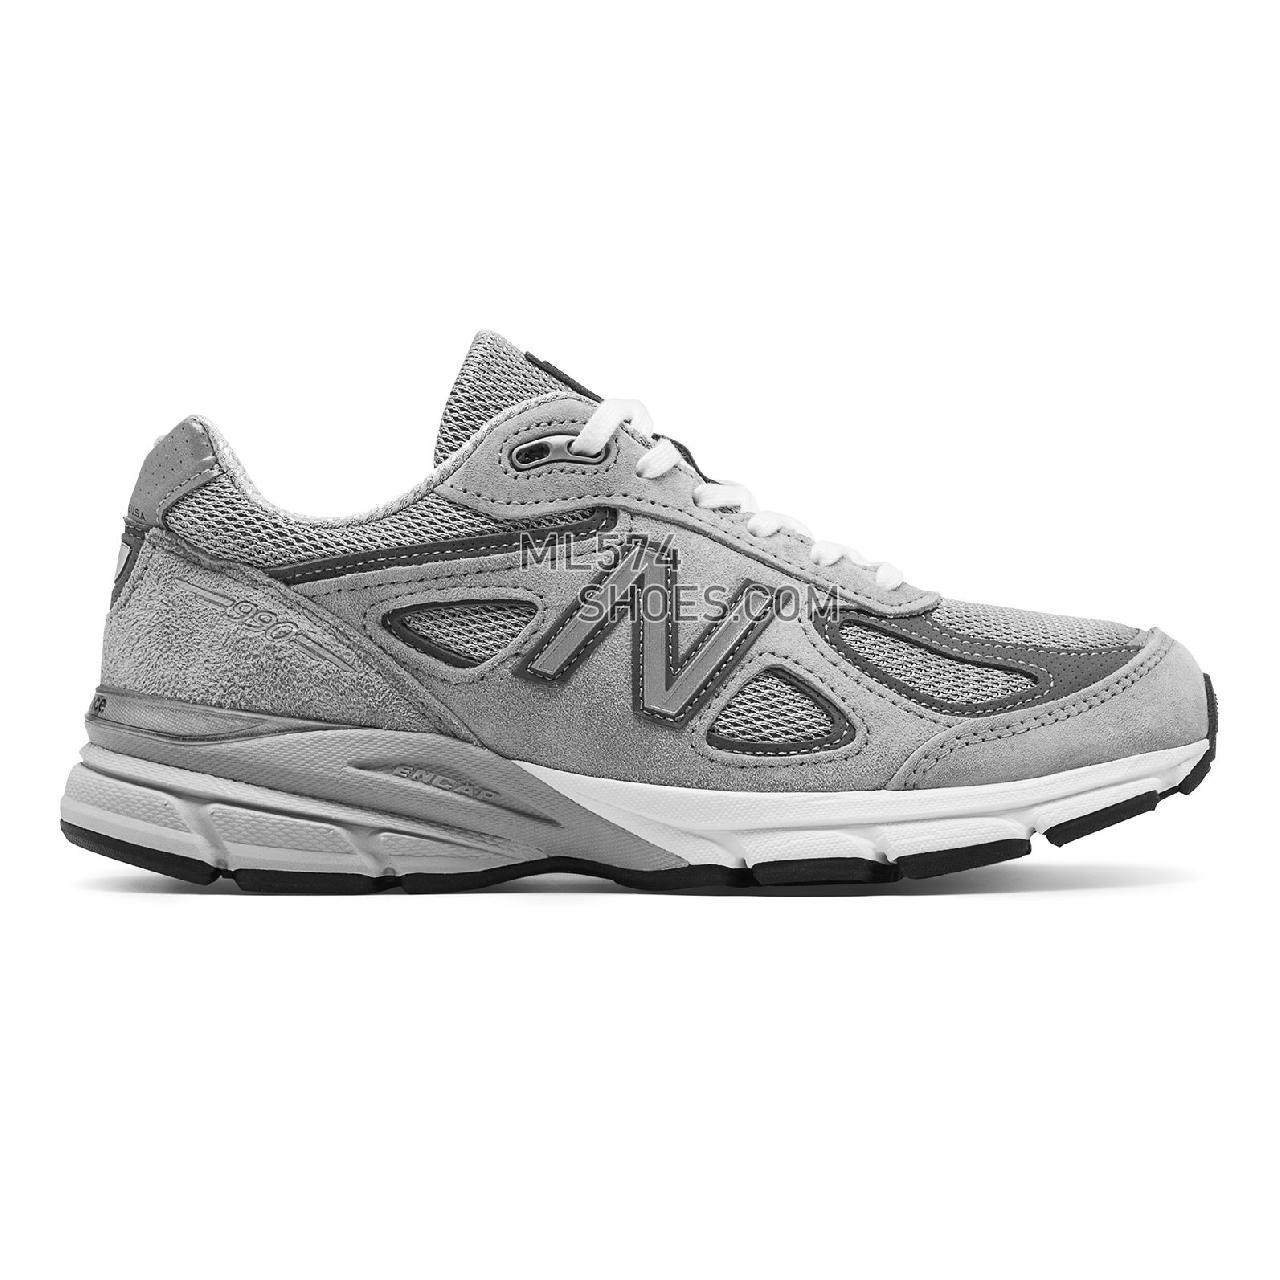 New Balance Womens 990v4 Made in US - Women's 990 - Running Grey with Castlerock - W990GL4